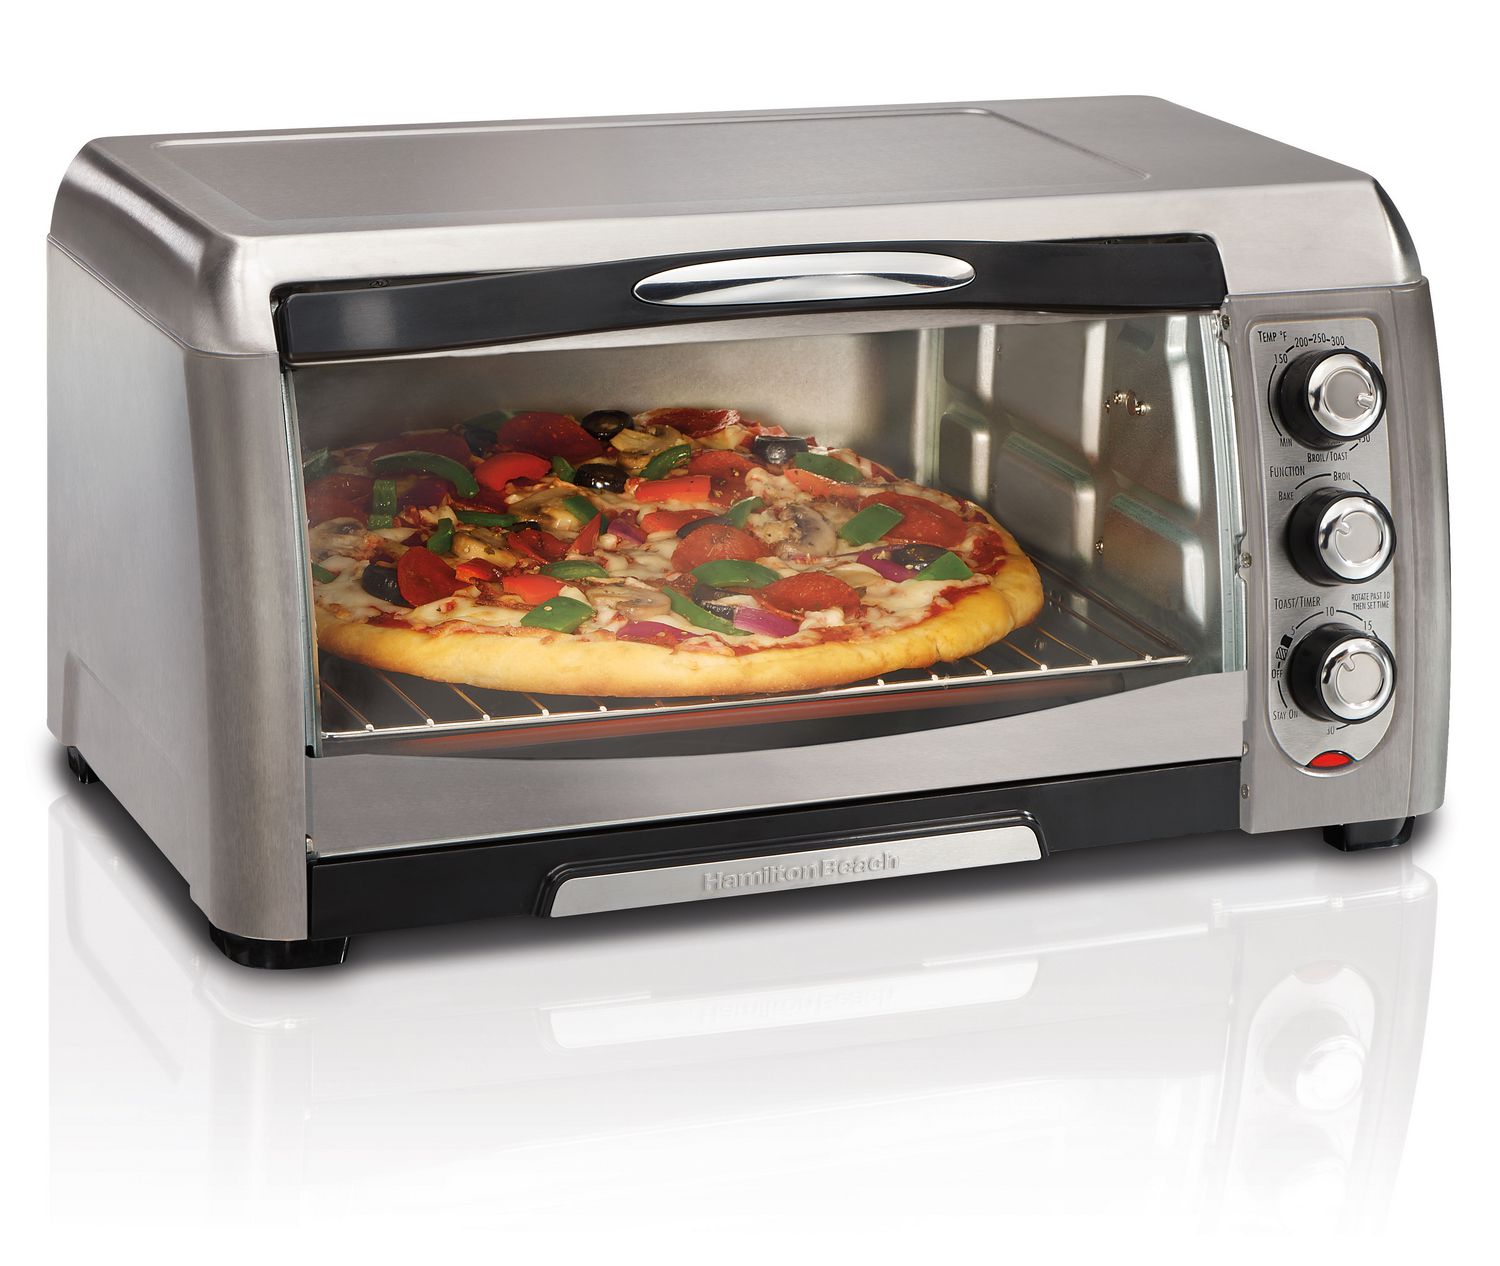 Check Out These 4 Dangers Of Microwave To Your Health